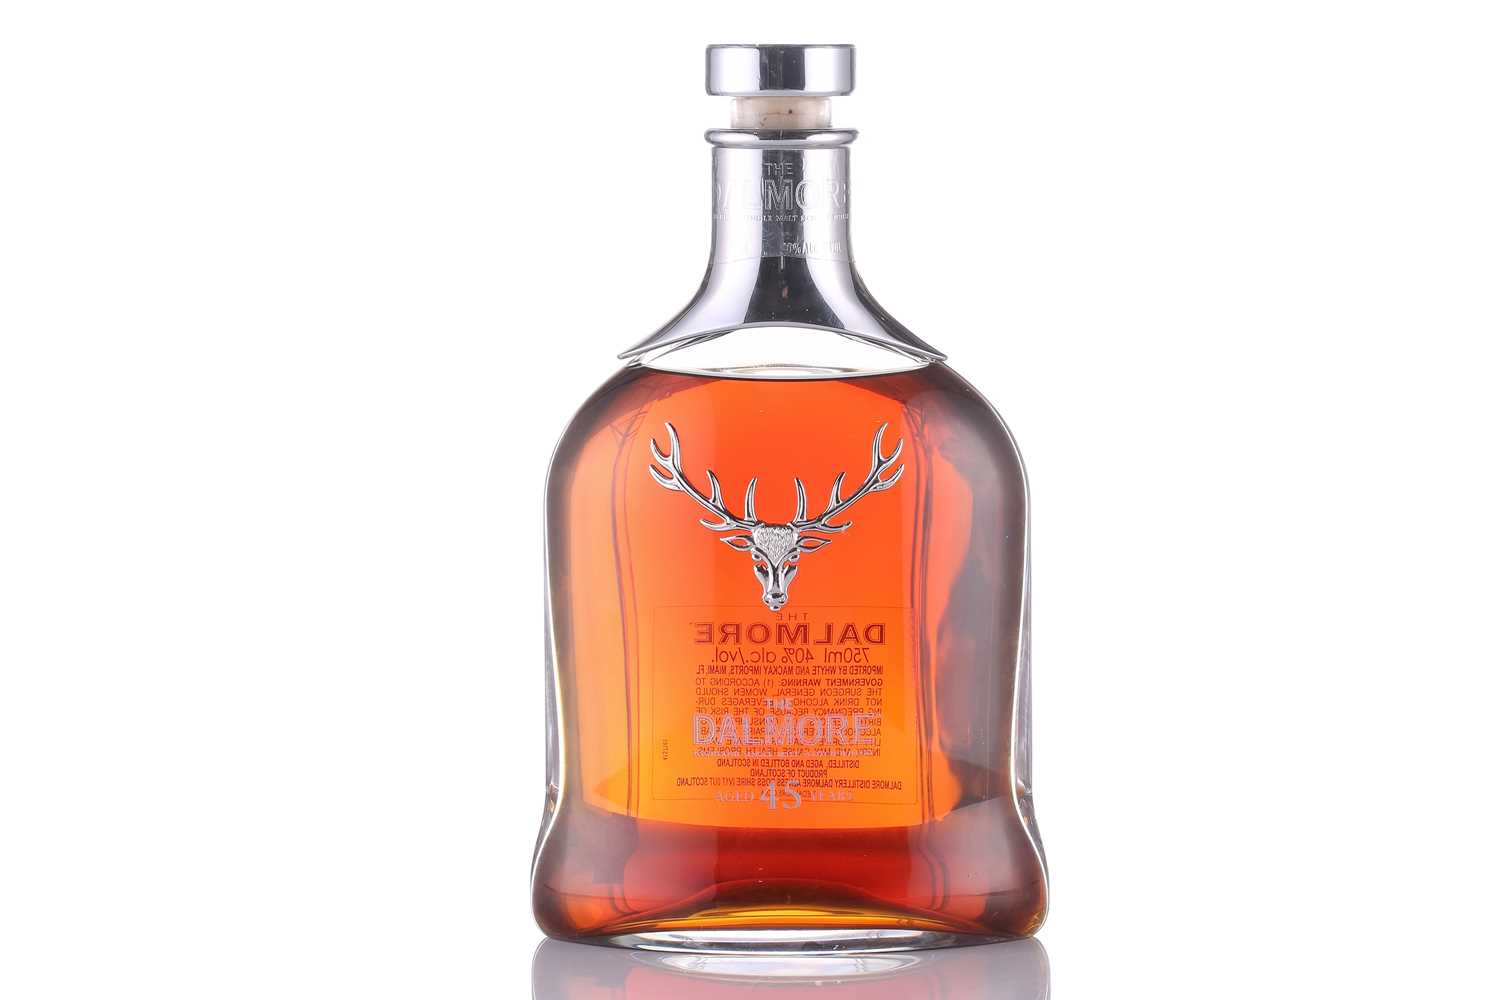 Lot 83 - A bottle of Dalmore 45 Year Old Highland...